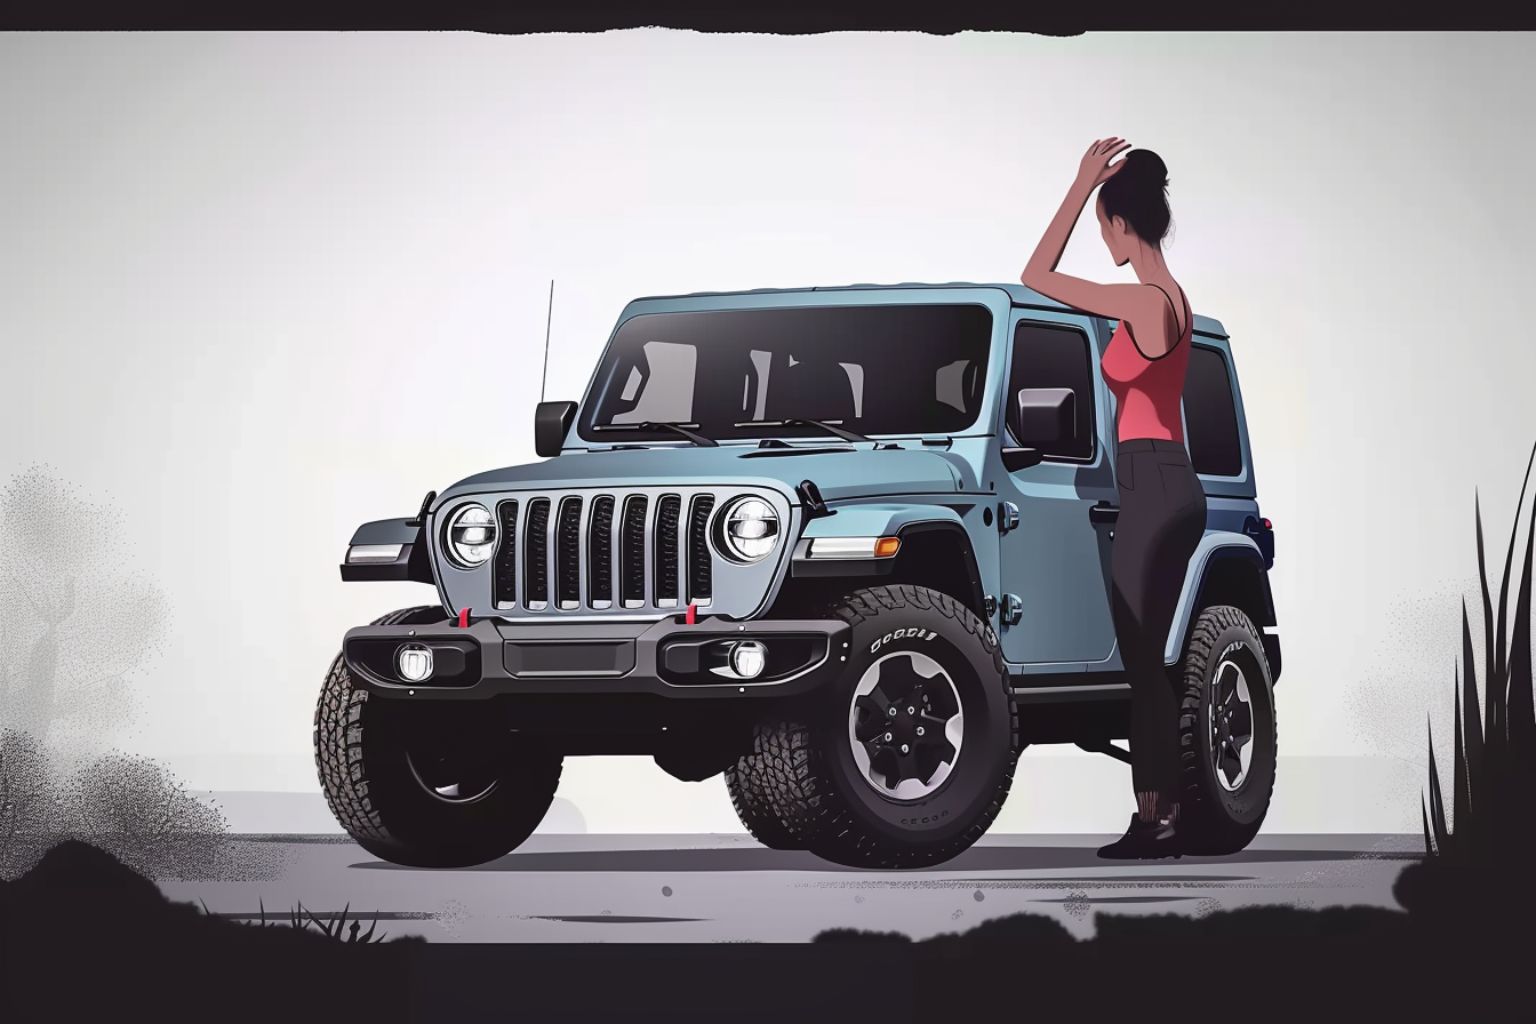 Jillian Kavanagh's experience with her 2021 Jeep Wrangler 4xe turned from excitement to frustration when its electric mode failed, revealing a deeper issue with Stellantis' acclaimed hybrid. Despite attempts to resolve through the dealership, the vehicle's problems persisted, leading to a recall notice and a depreciating asset. As Kavanagh seeks to escape her lease amidst a class action lawsuit hinting at widespread defects, her story underscores the complexities of leasing modern vehicles and the potential pitfalls of hybrid technology. Will her legal battle offer a path to resolution, or is it a road to further disappointment?